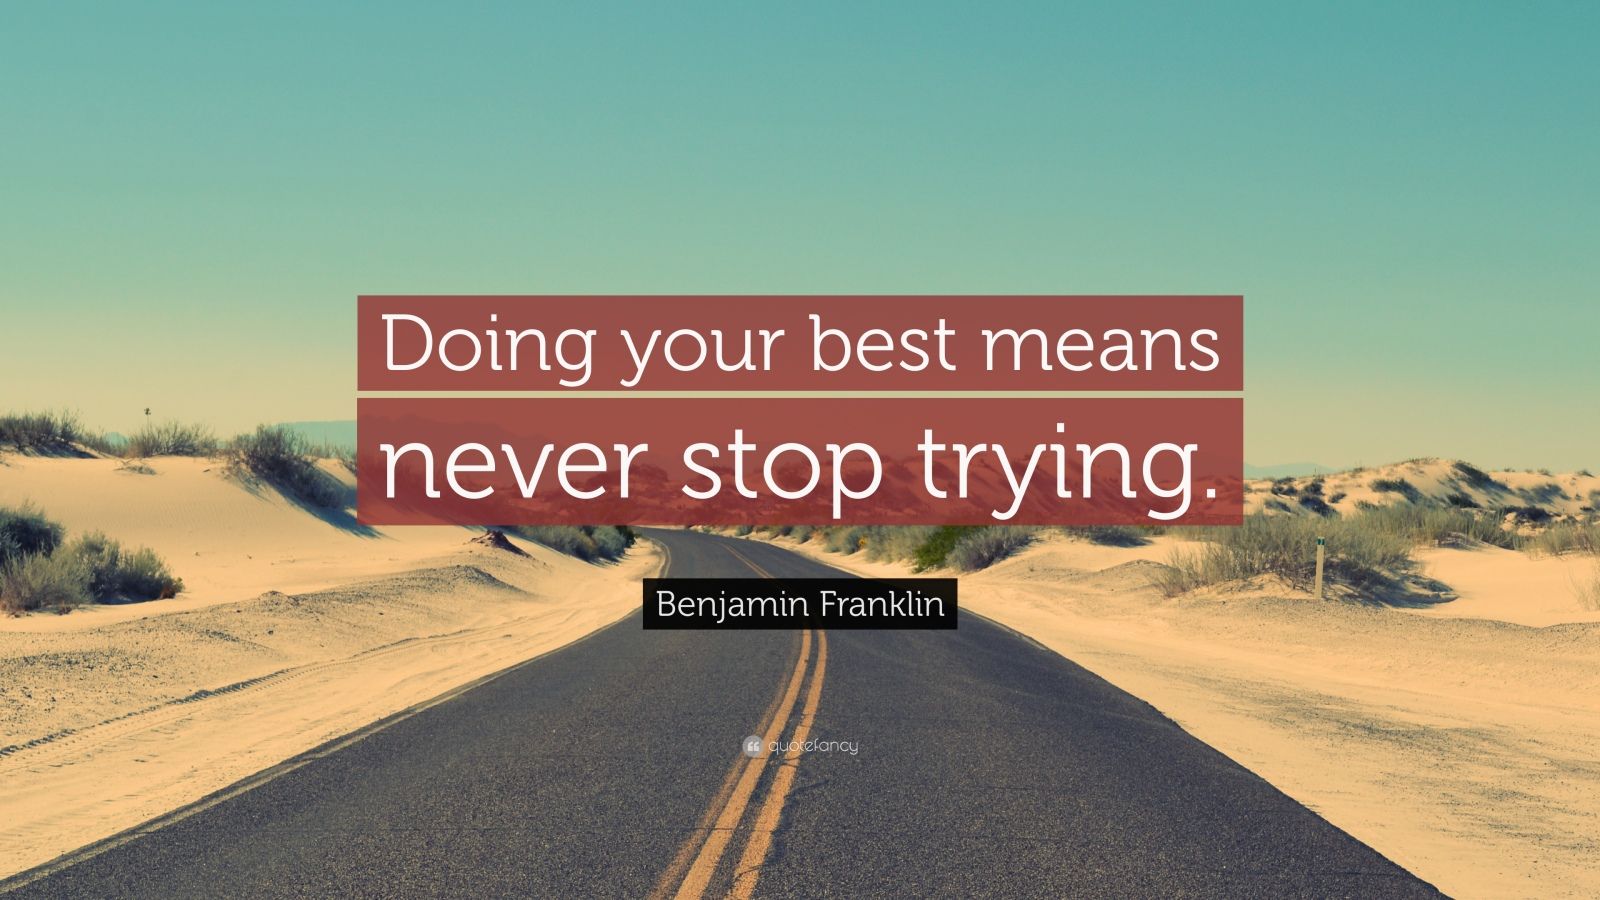 Benjamin Franklin Quote: “Doing your best means never stop trying.”